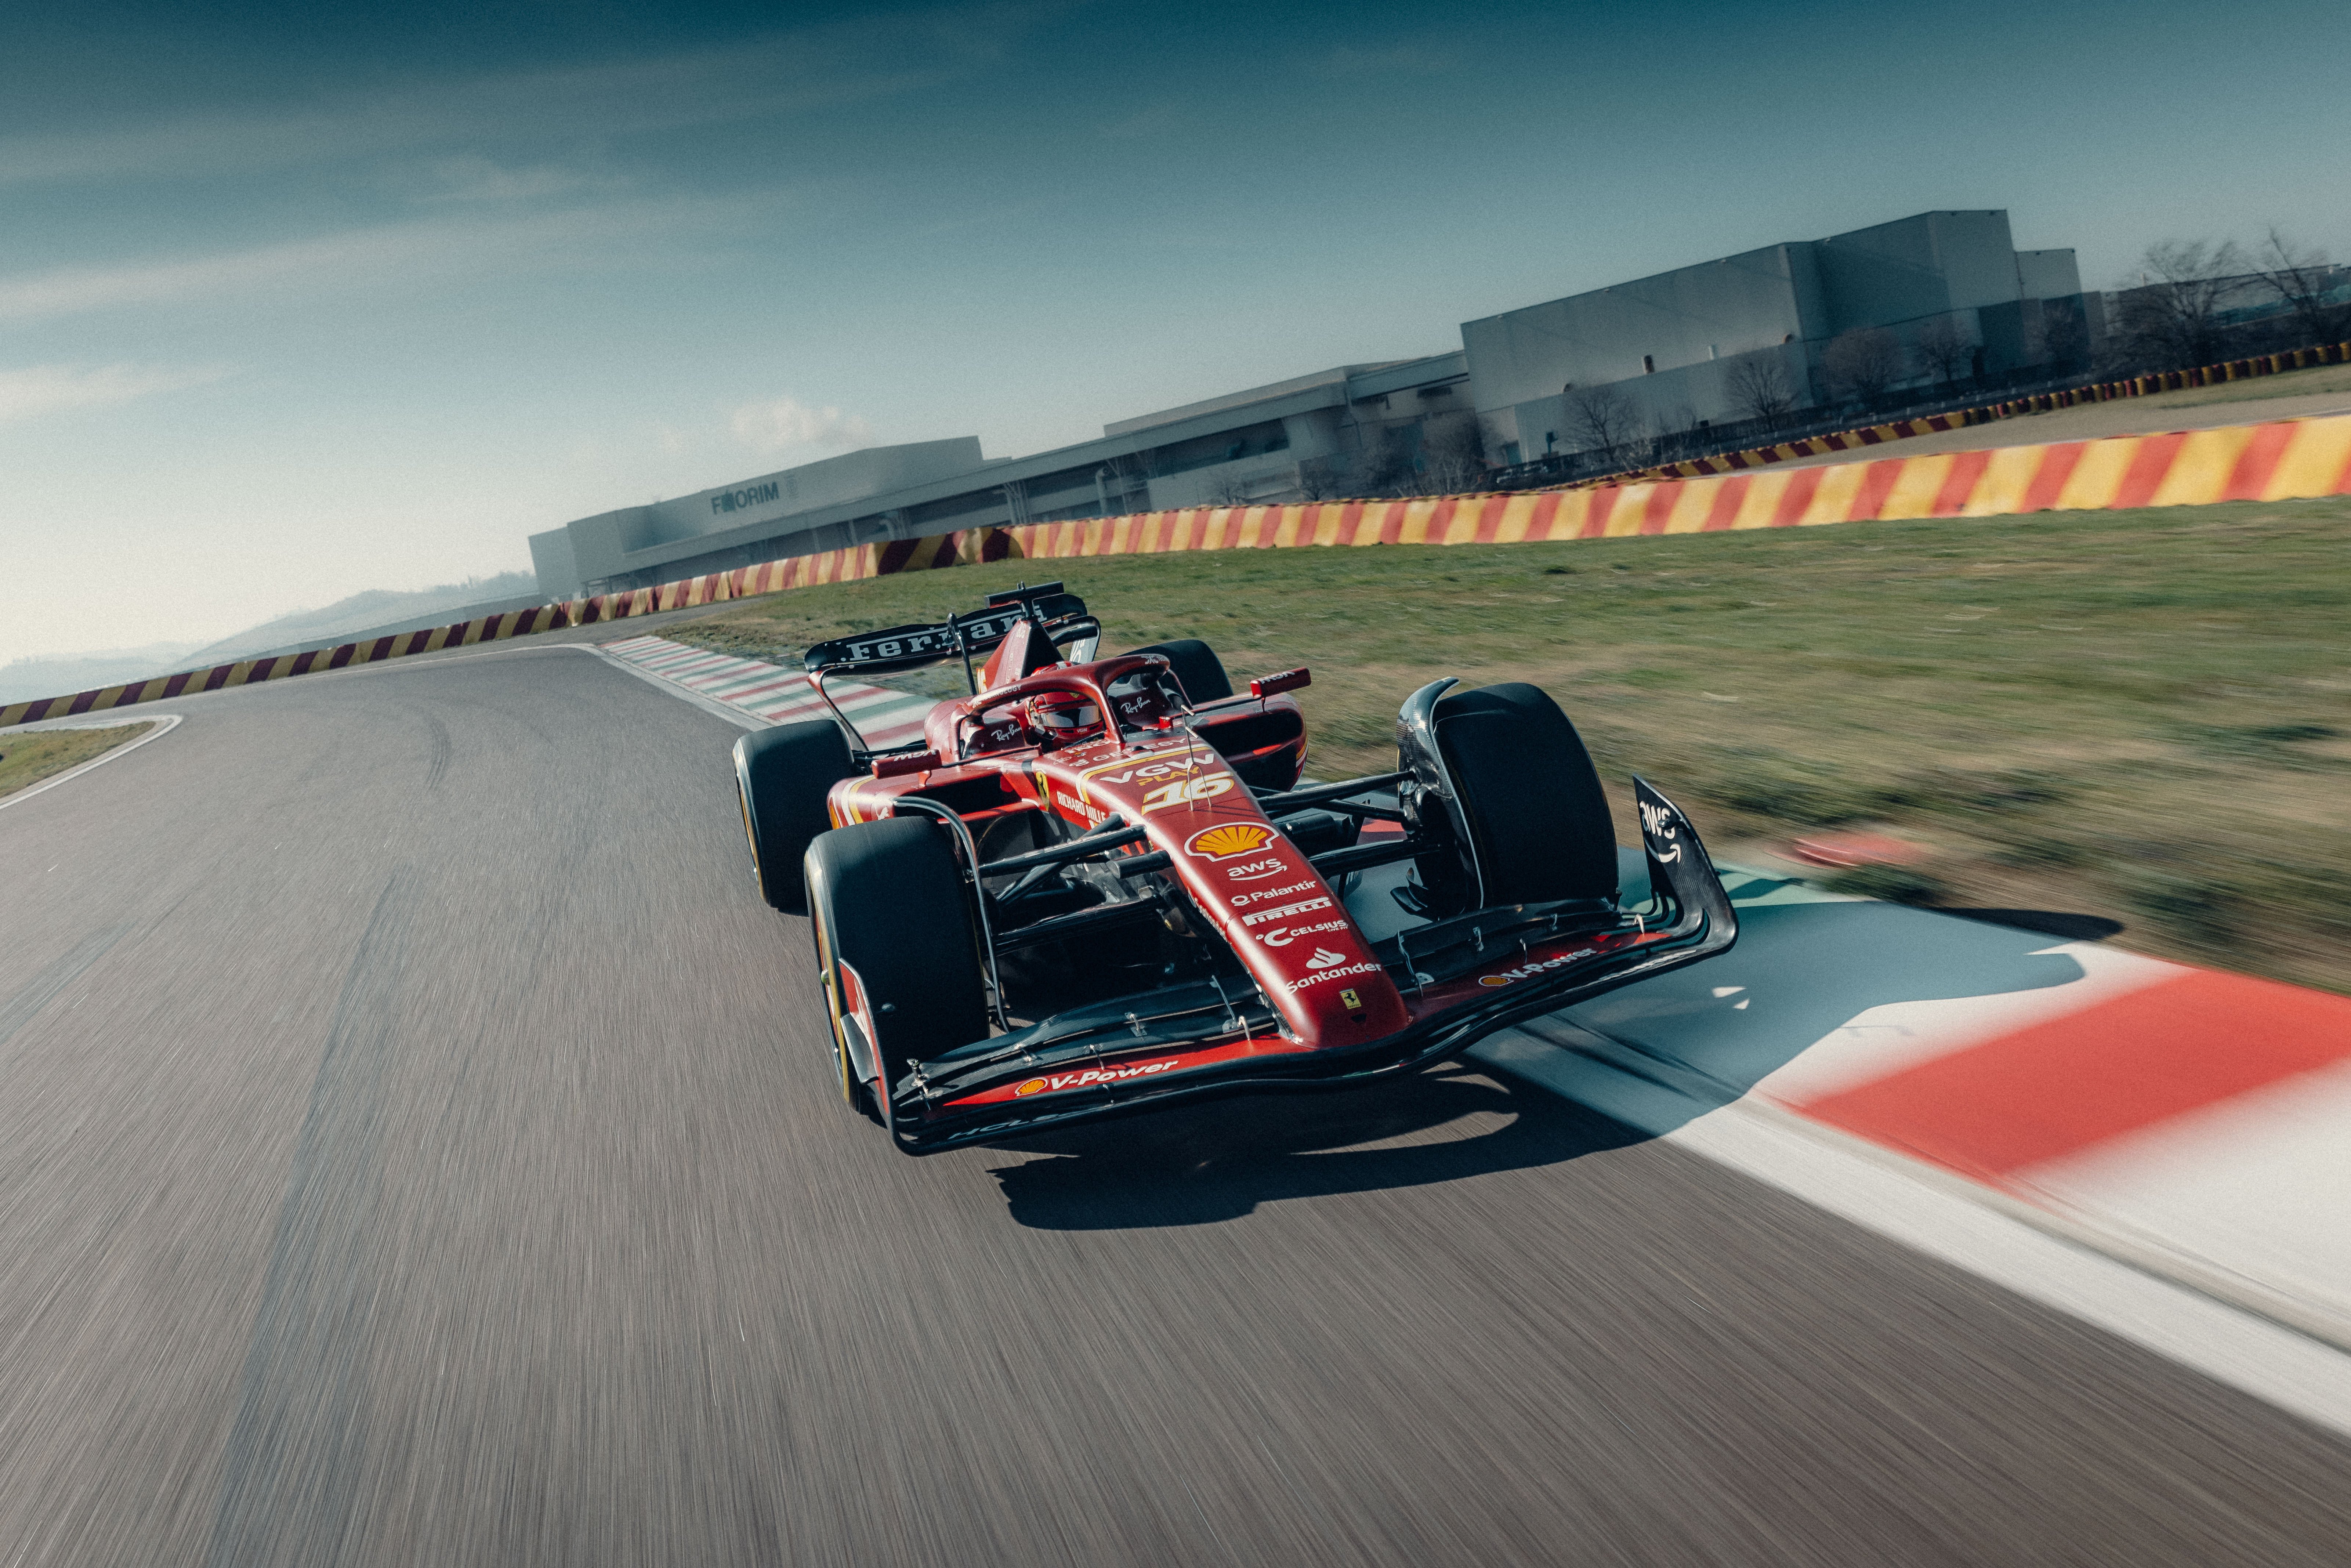 5 Cybersecurity Lessons Leaders Can Take Away from Formula 1 Racing